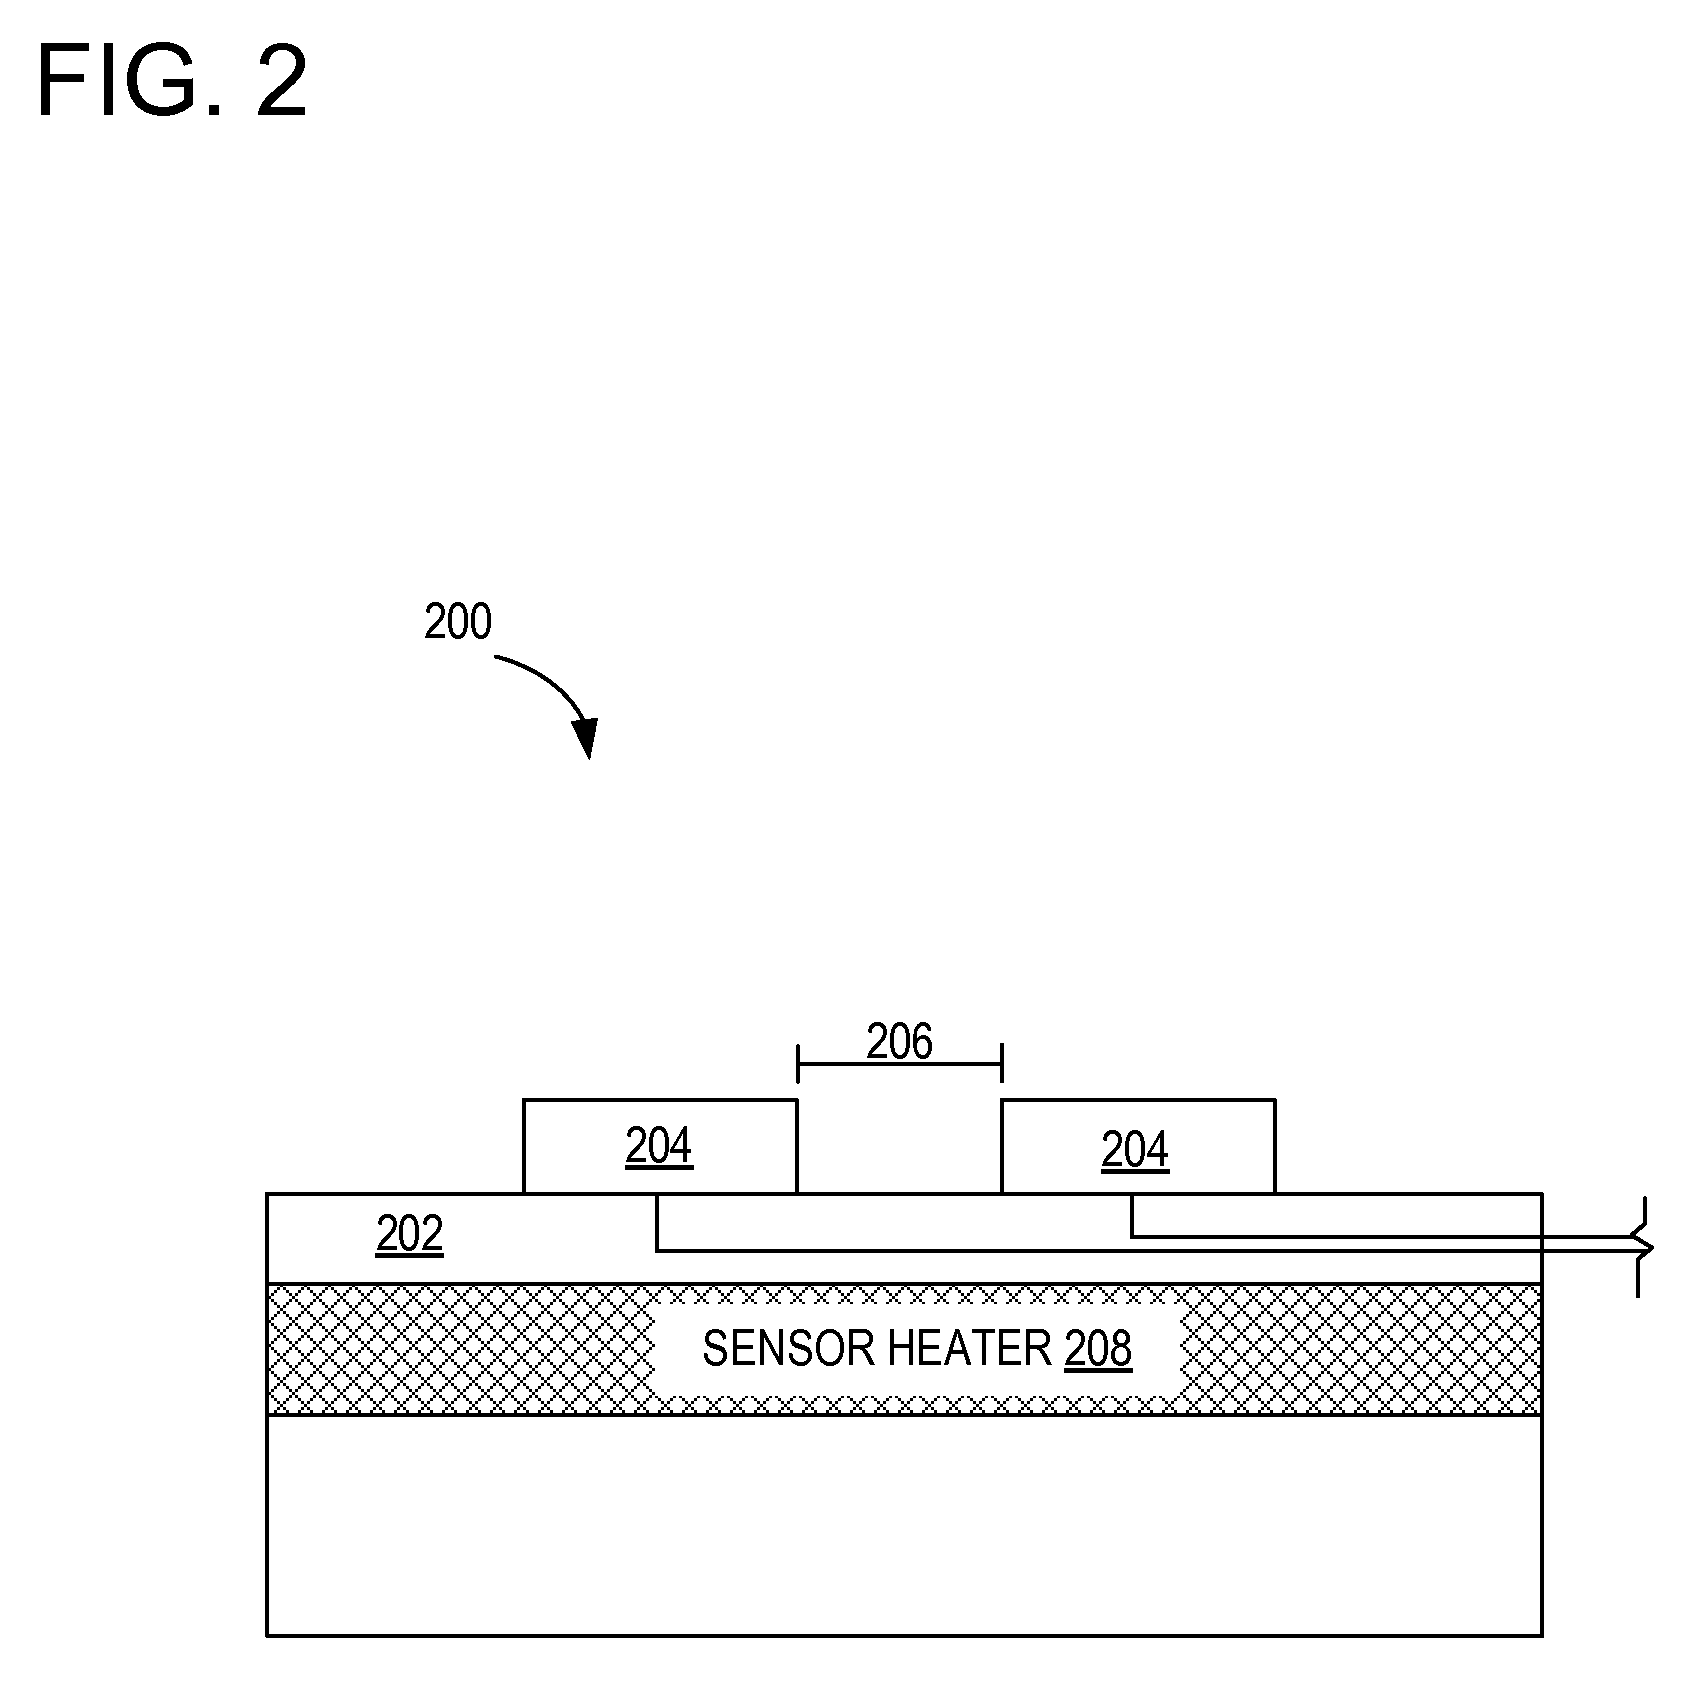 Emission control with a particulate matter sensor